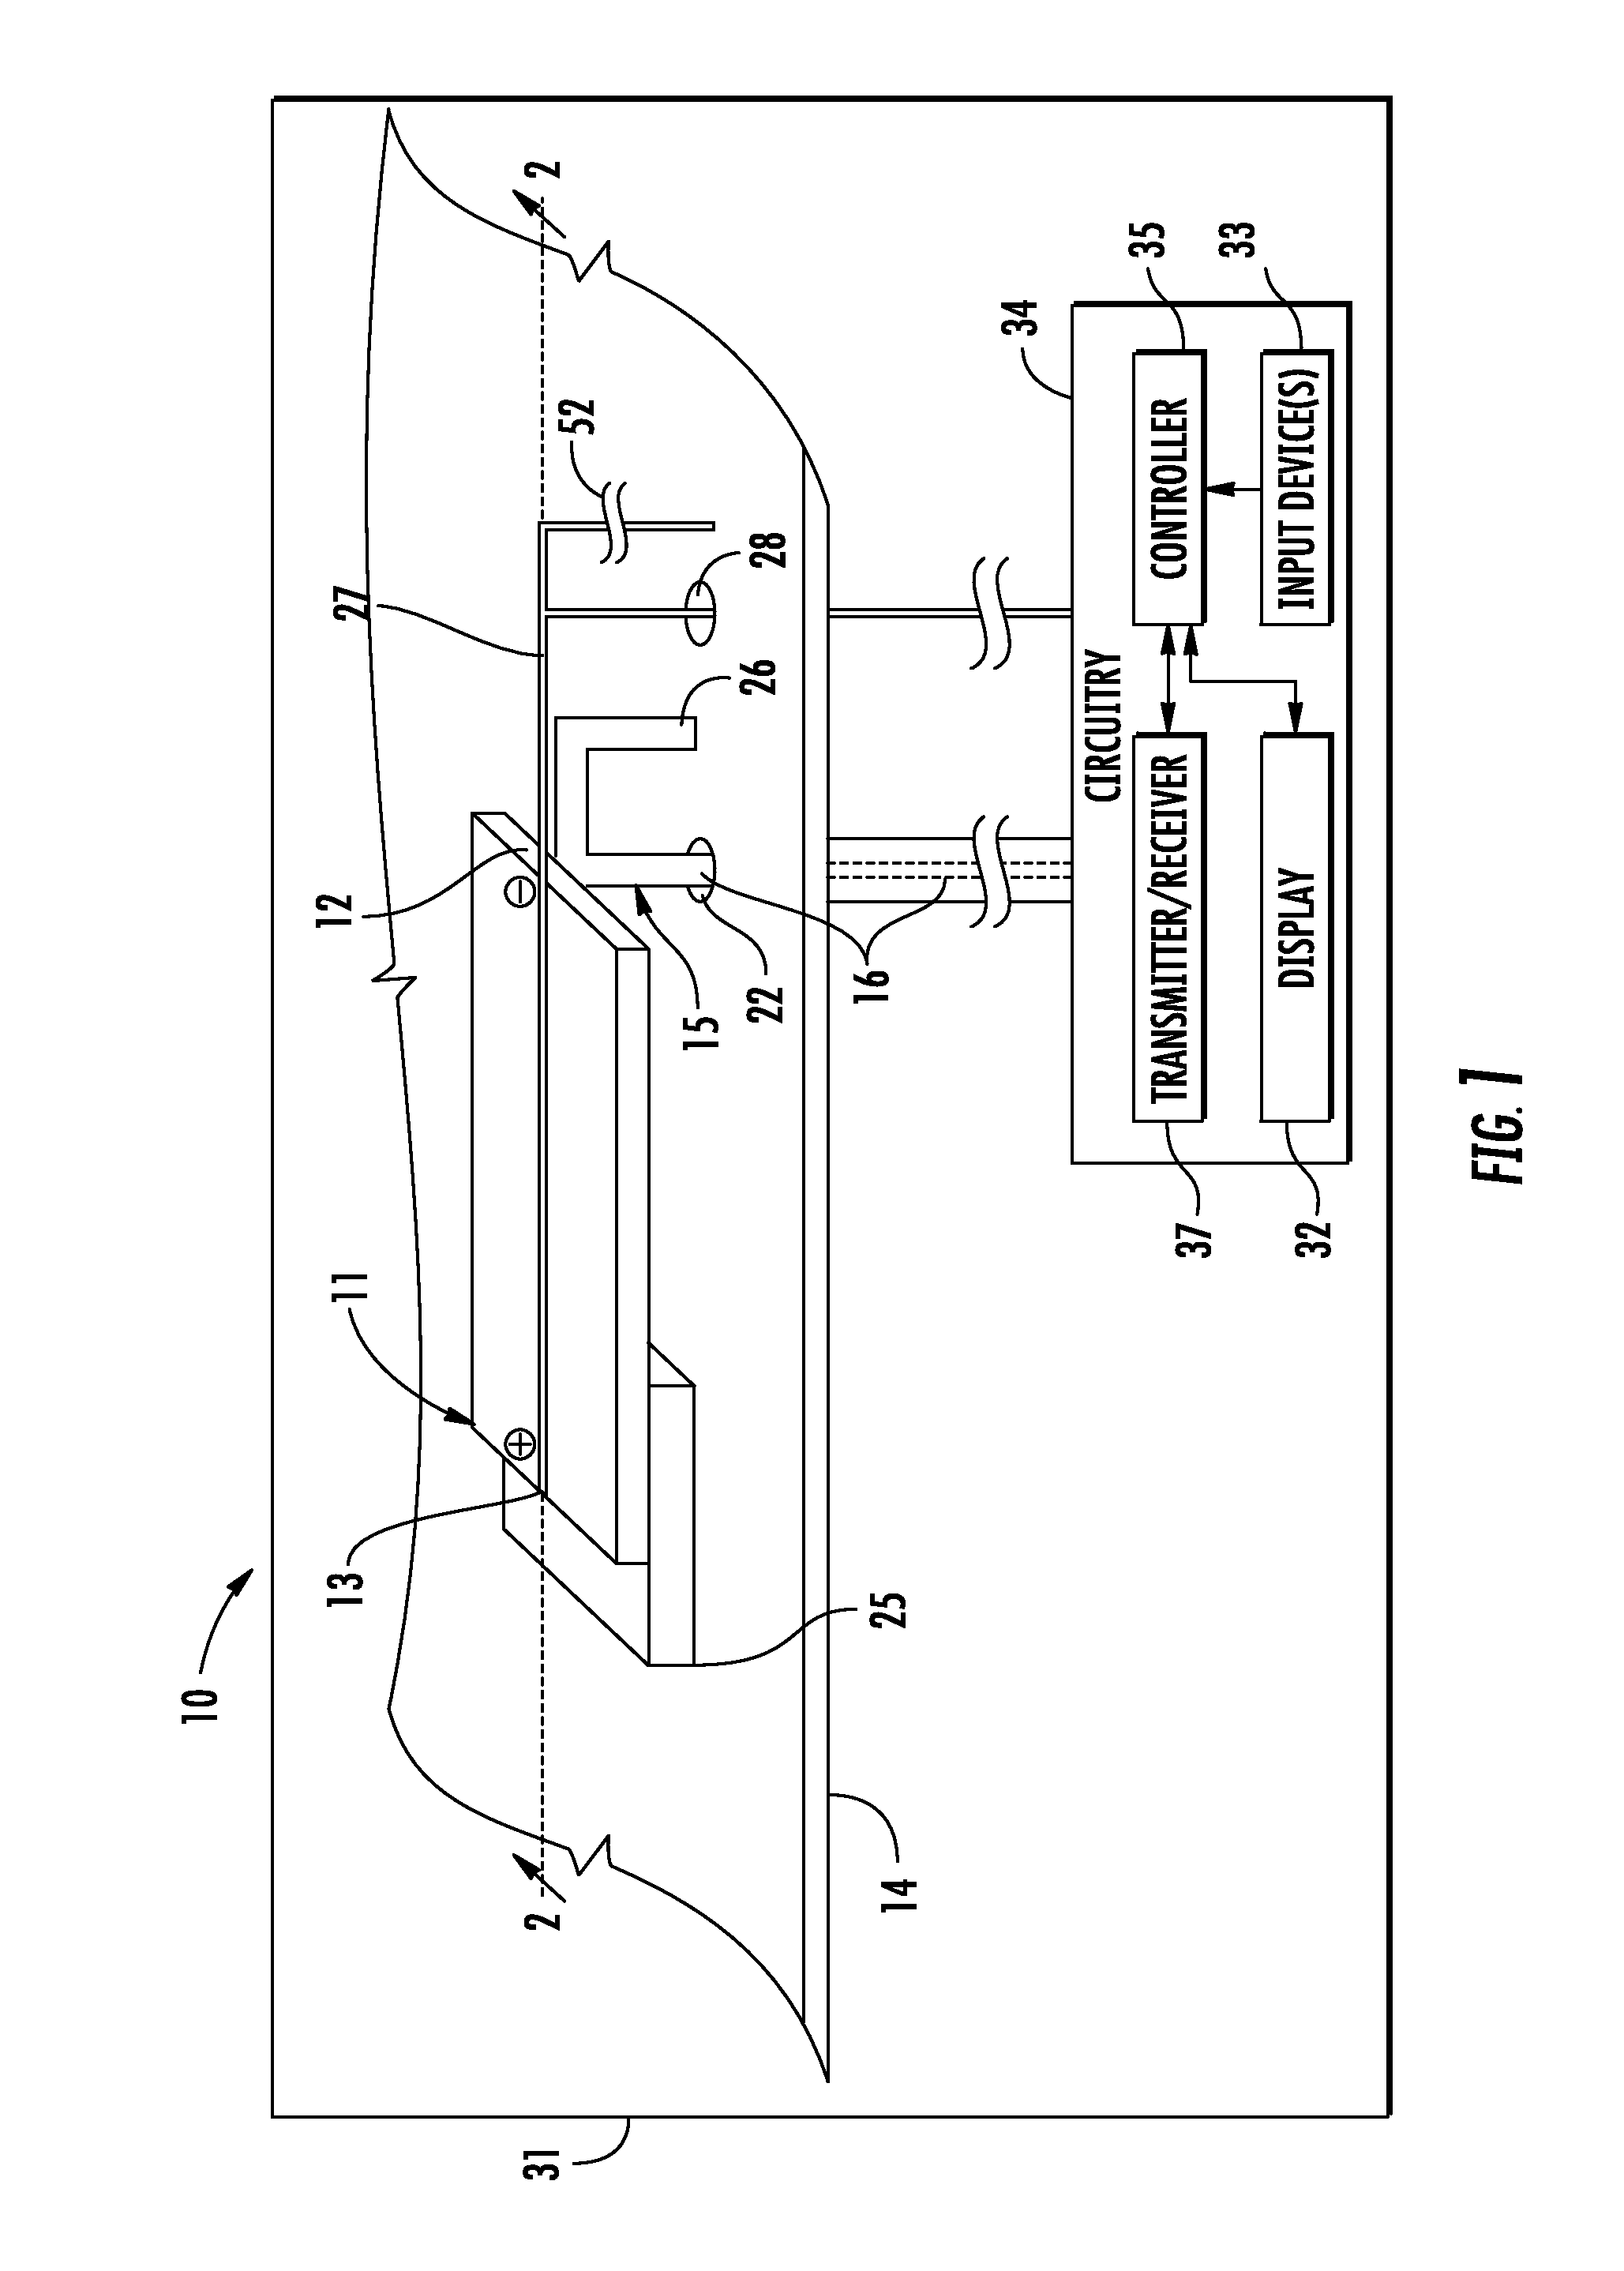 Electronic device having solar cell antenna element and related methods